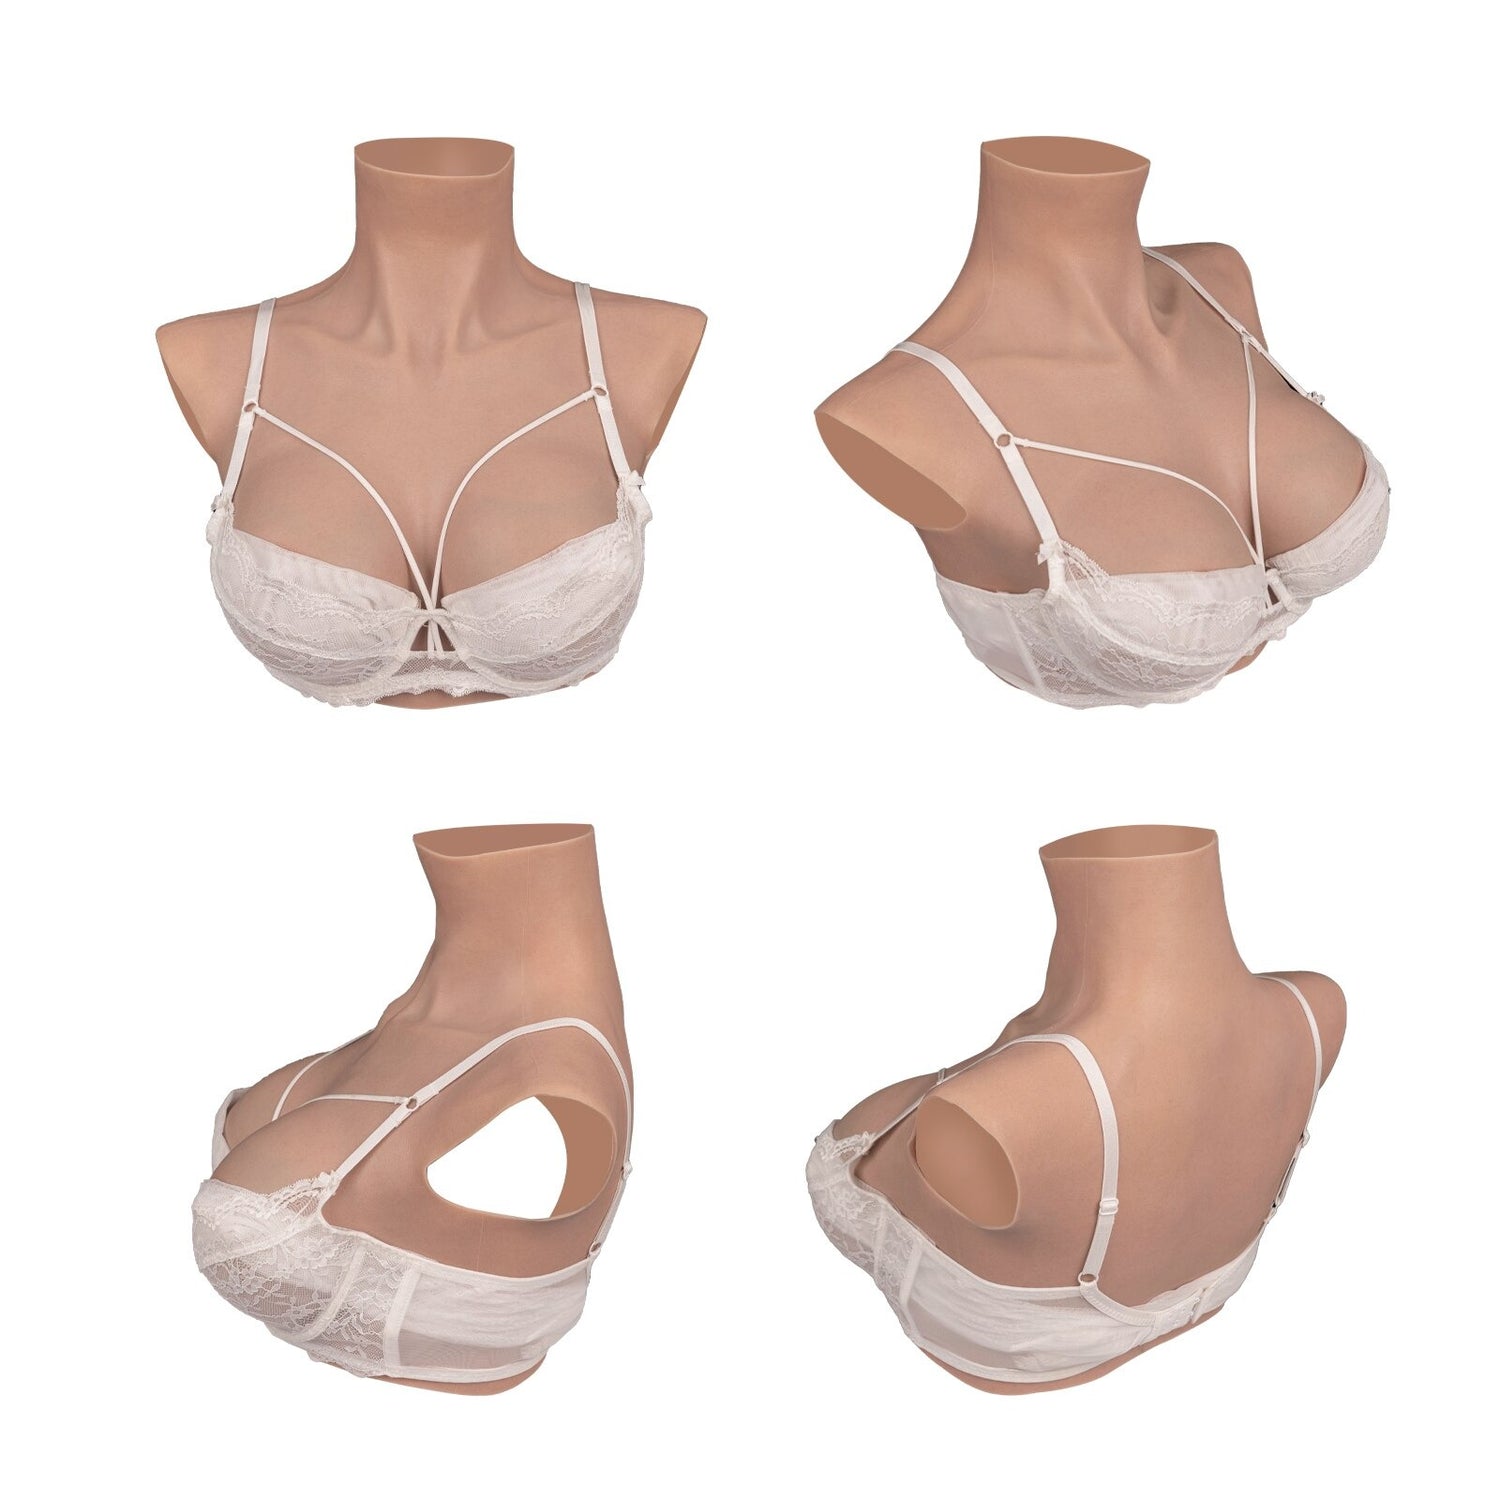 H Cup Huge Silicone Breast Forms – The Drag Queen Store